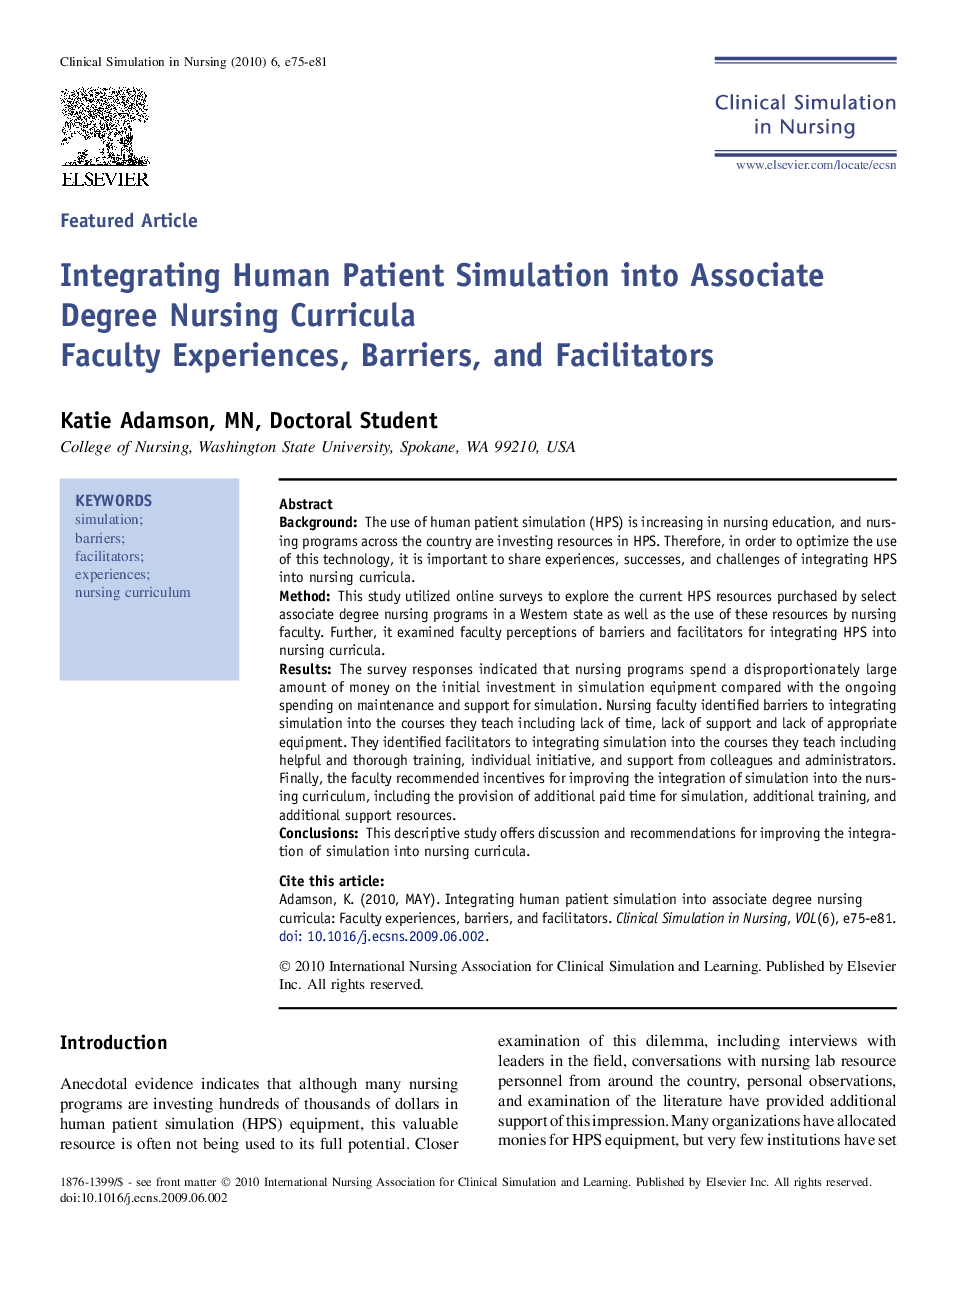 Integrating Human Patient Simulation into Associate Degree Nursing Curricula : Faculty Experiences, Barriers, and Facilitators